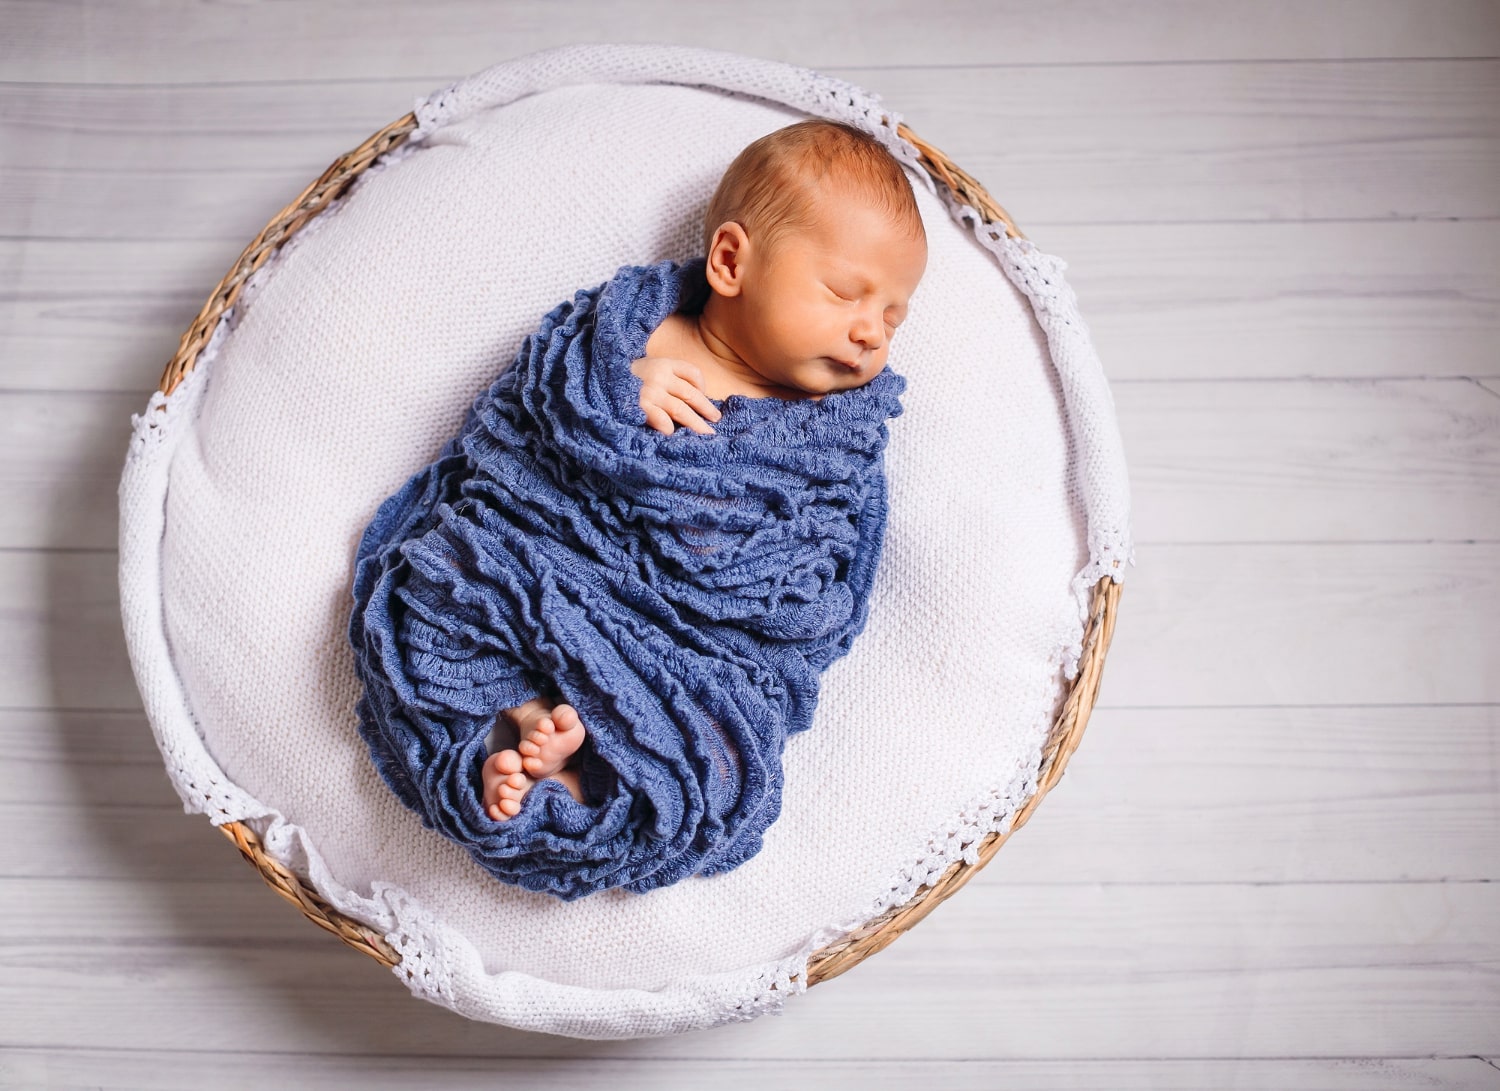 Cute newborn baby nestled in a basket for an adorable photoshoot in Singapore